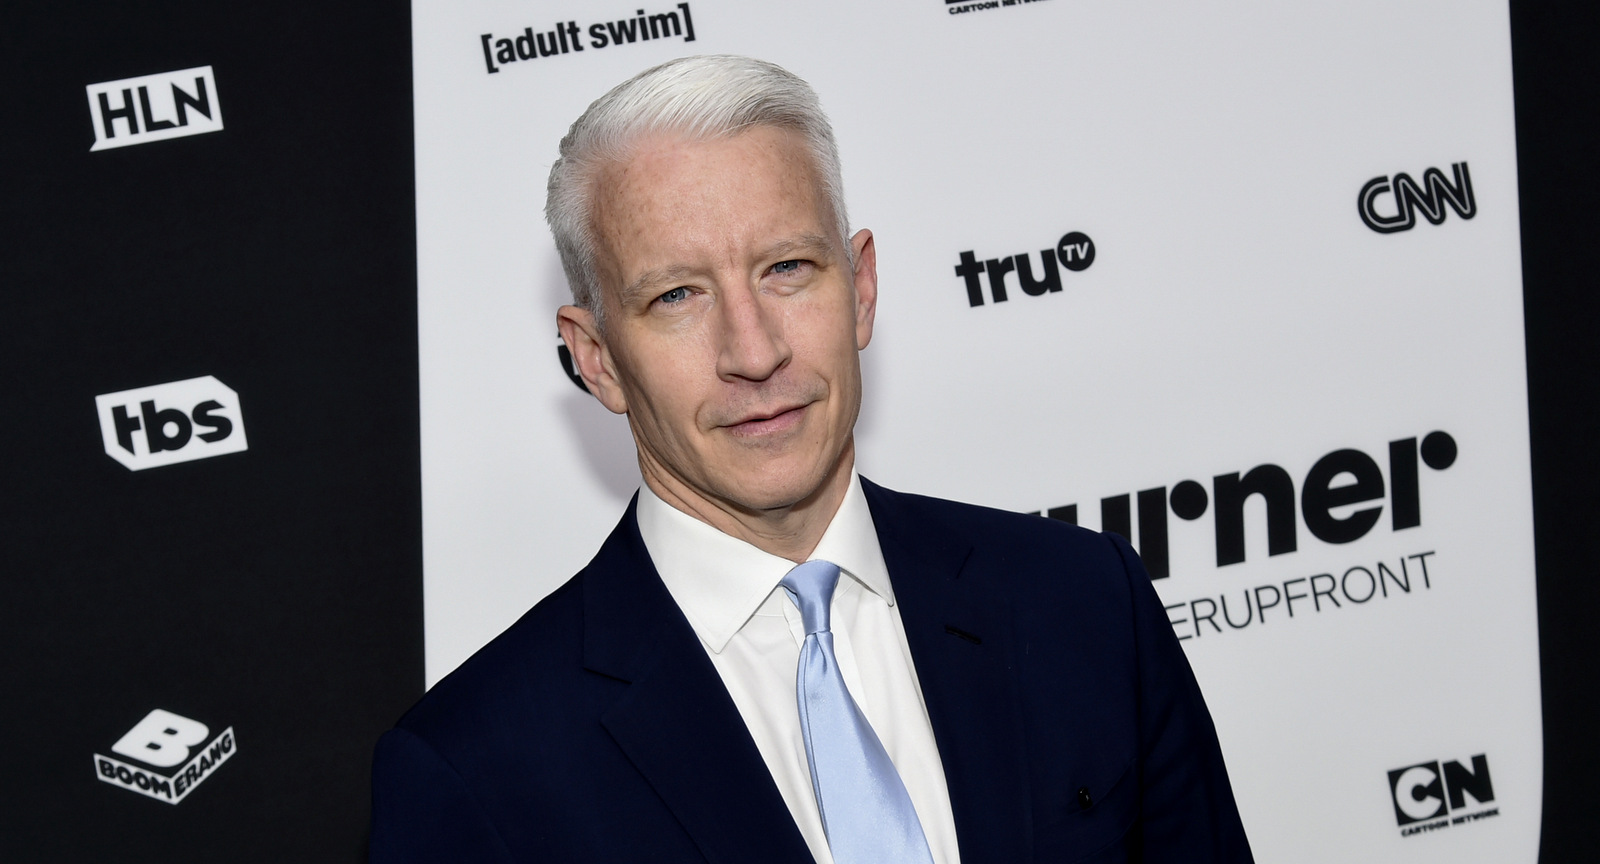 Anderson Cooper attends the Turner Network 2016 Upfronts in New York. Cooper will star in Facebook Watch's new news programming. Evan Agostin | Invision | AP